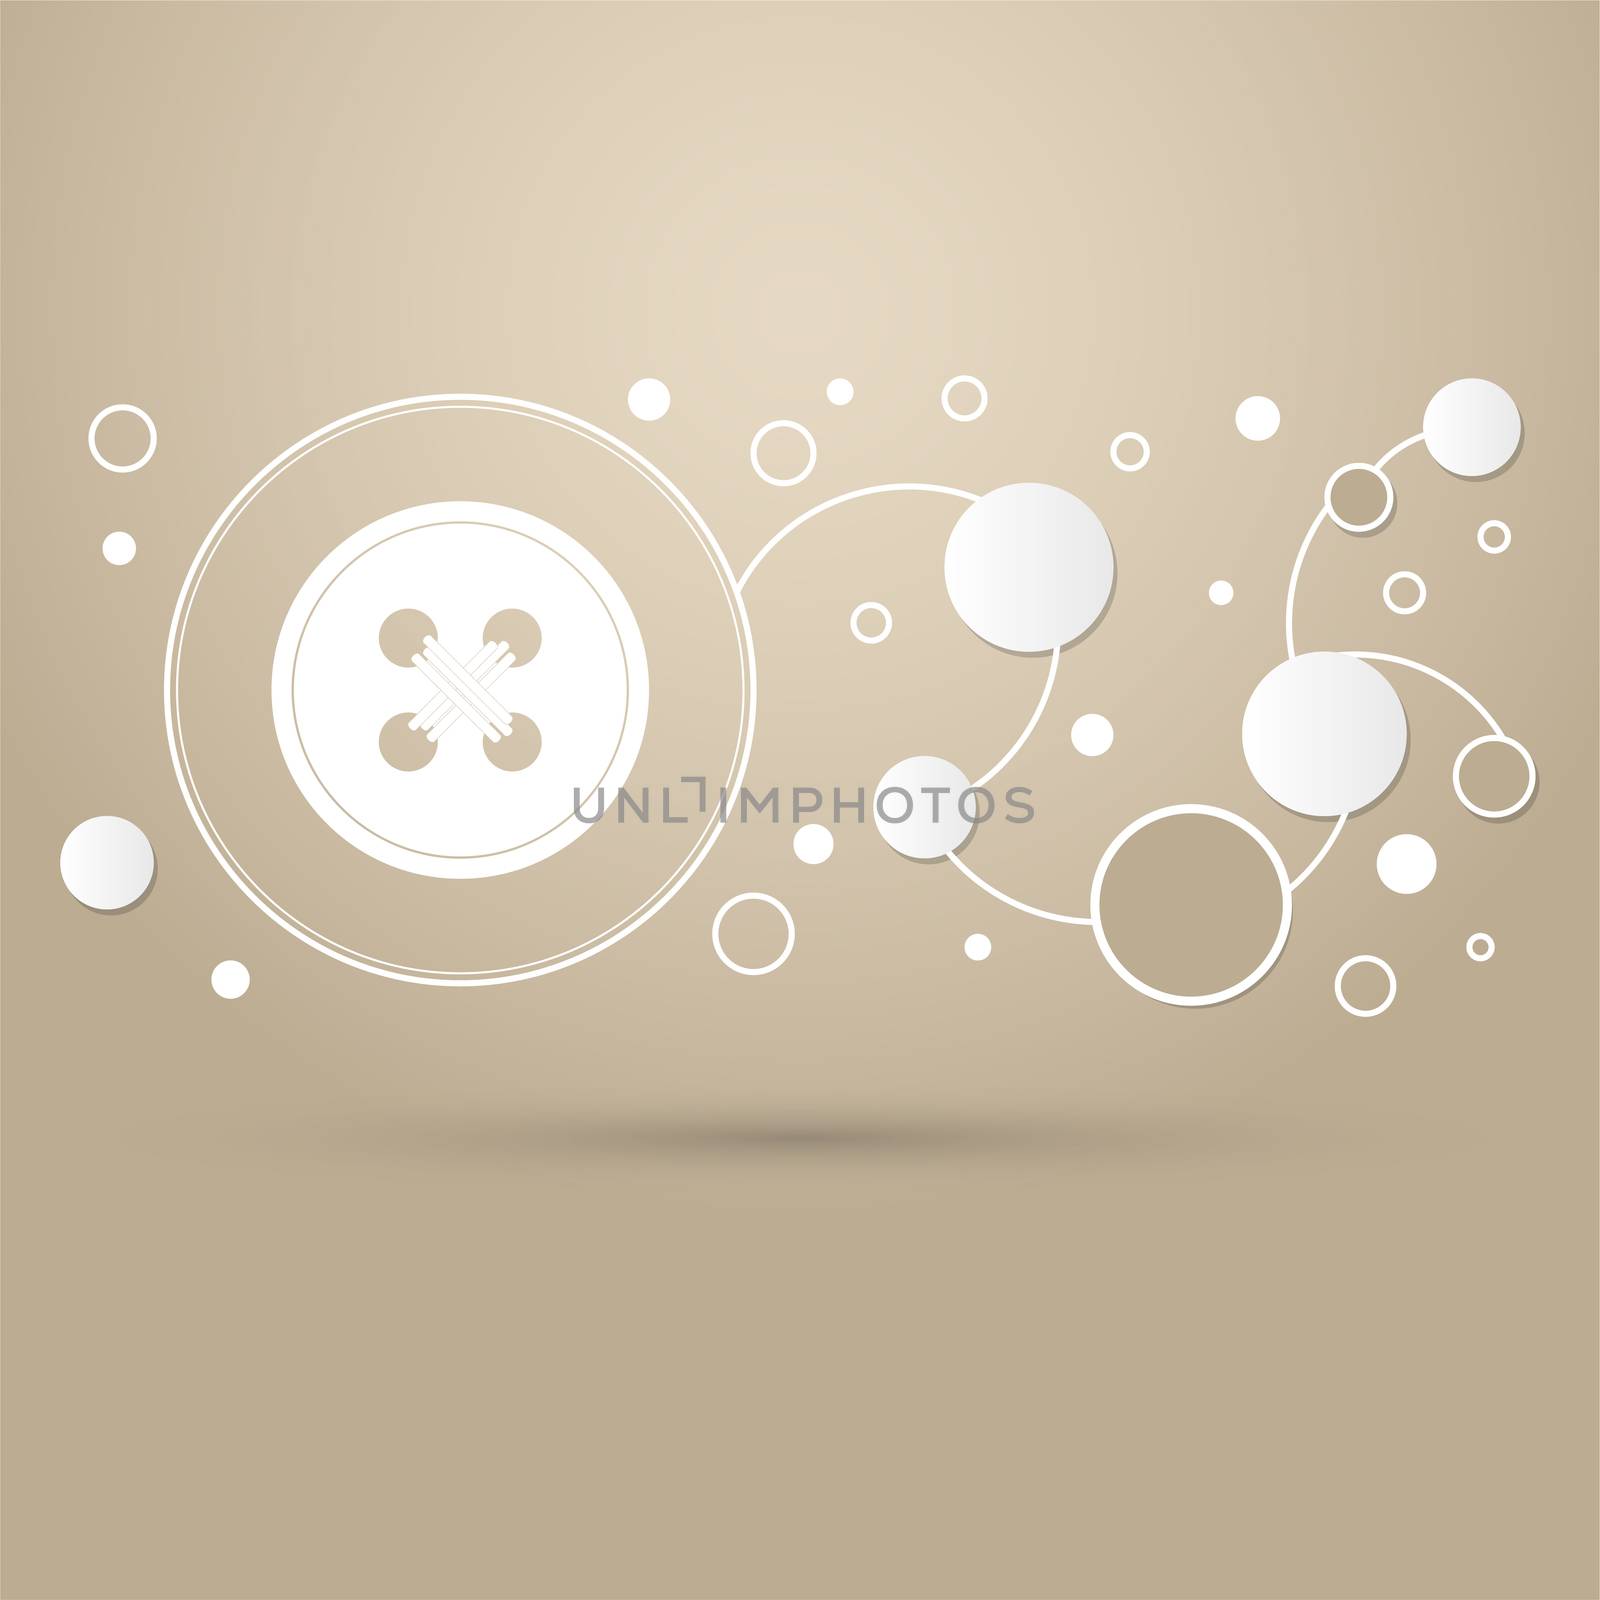 button for clothes icon on a brown background with elegant style and modern design infographic. illustration